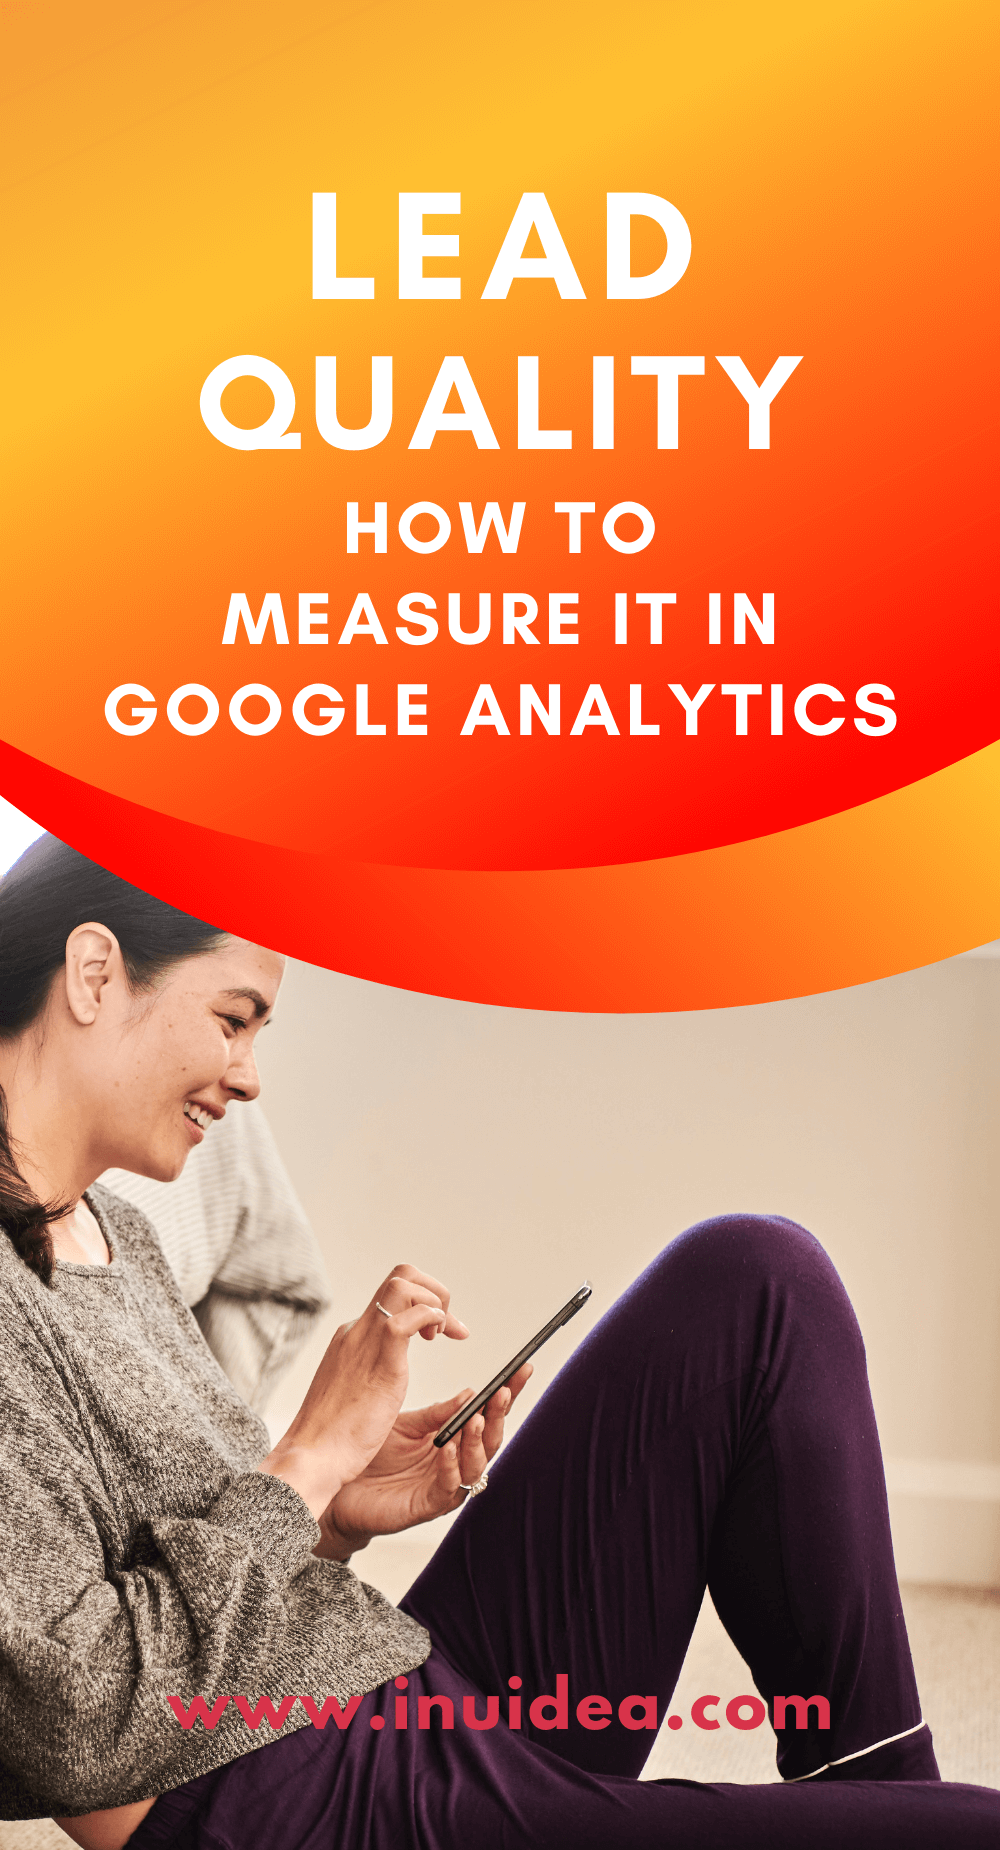 What is Lead Quality And How To Measure It in Google Analytics